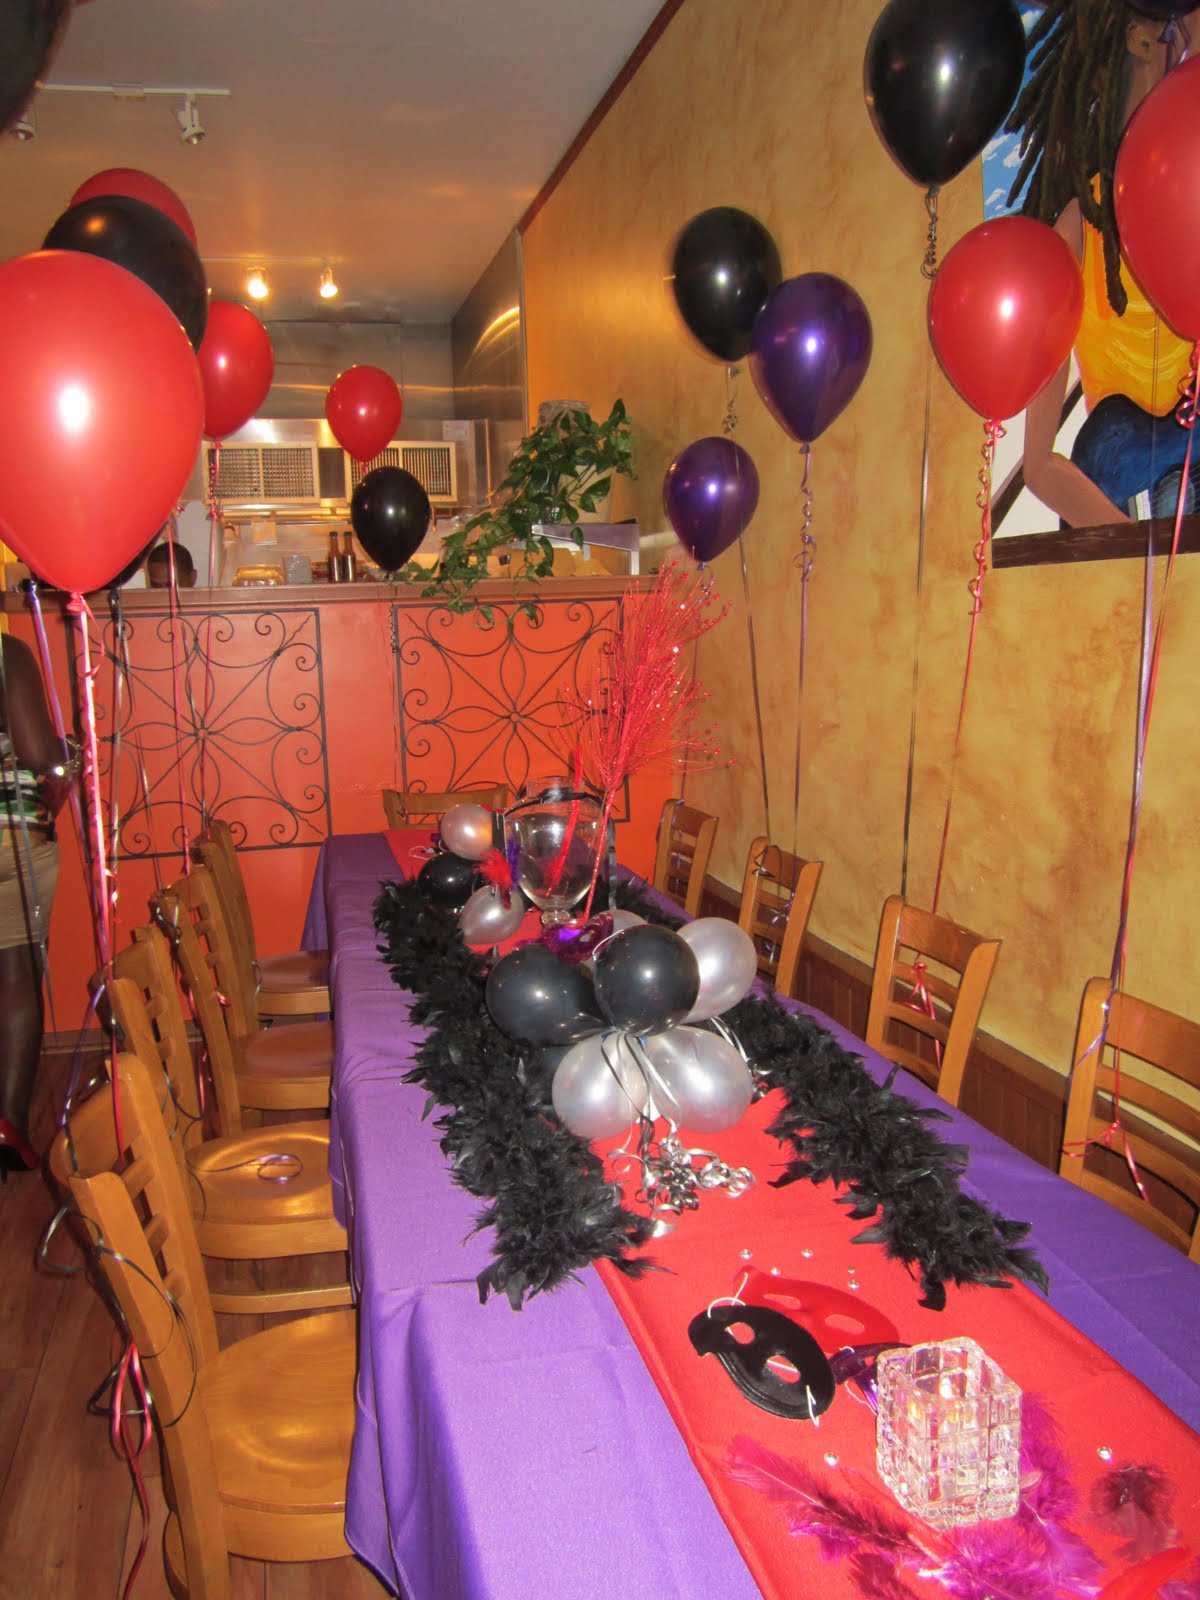 Dinner Party Restaurant Ideas
 How To Decorate a Birthday Dinner Red Purple & Black